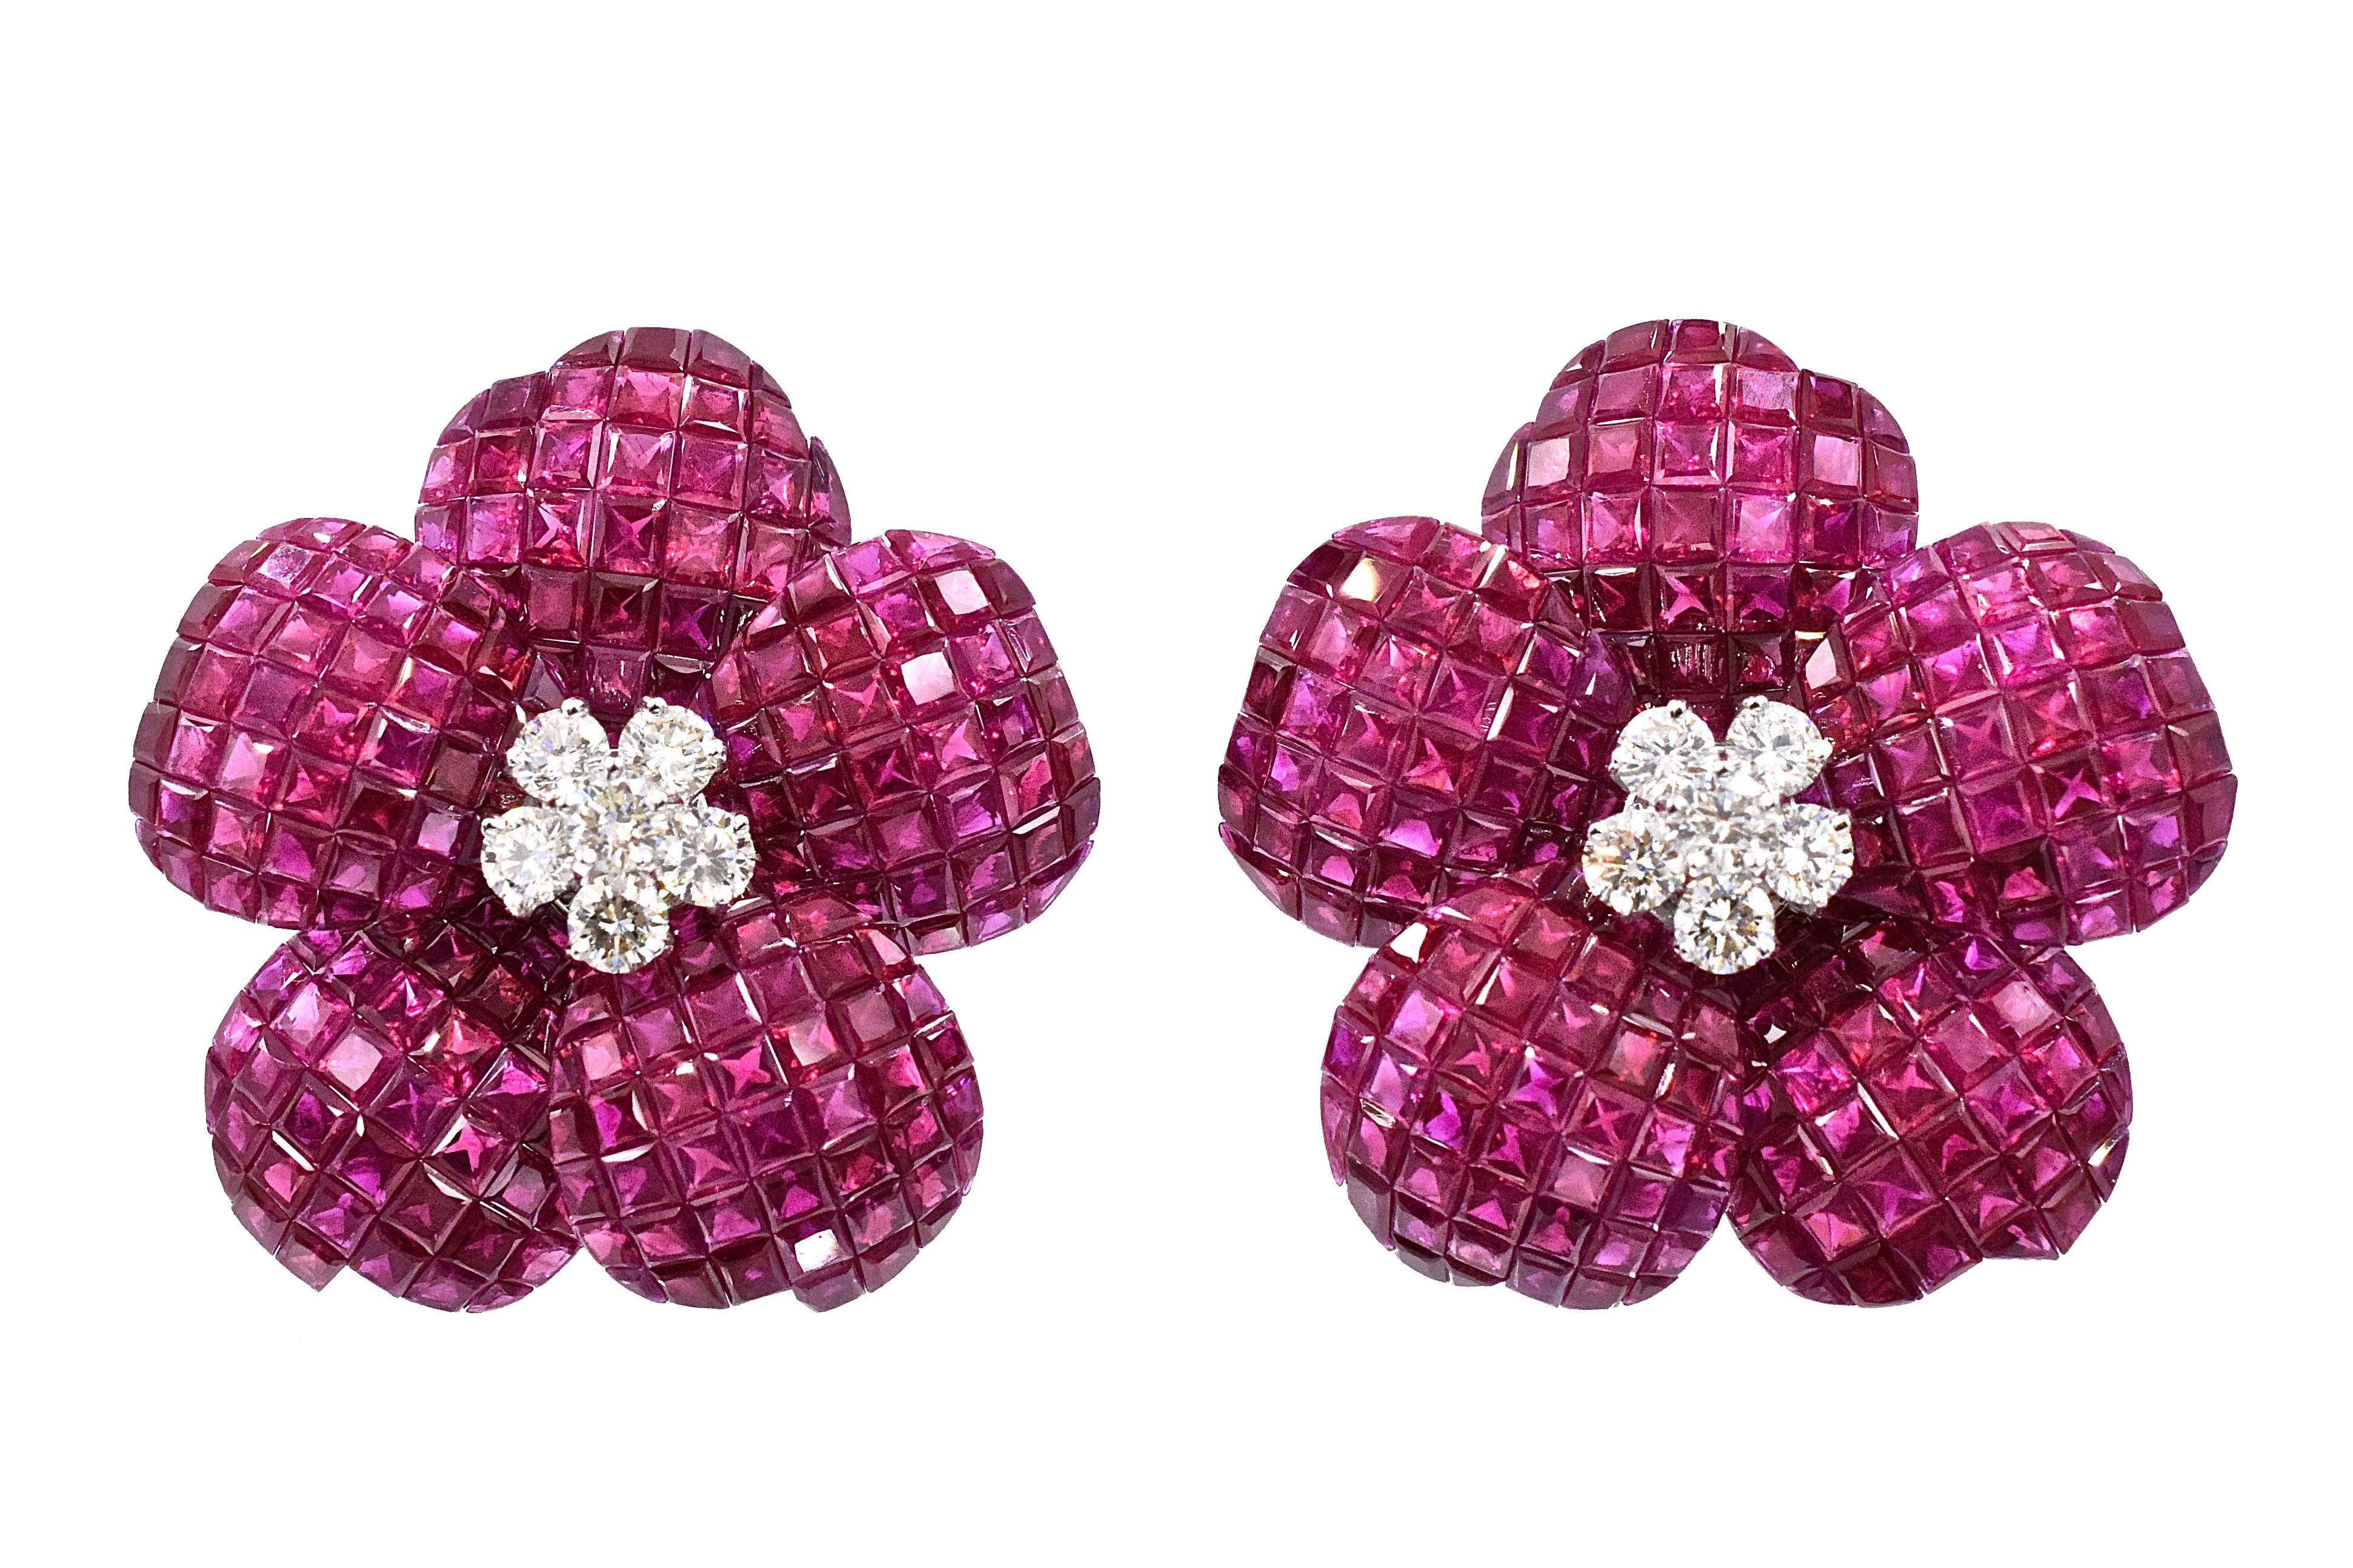 Classic  ruby and diamond flower earrings. 
Five mystery set ruby flower petals centered with 5 diamonds.
Estimated total ruby weight is 46.88 carats and total diamond weight is 1.5 carats
18 K gold with with omega lock. 

